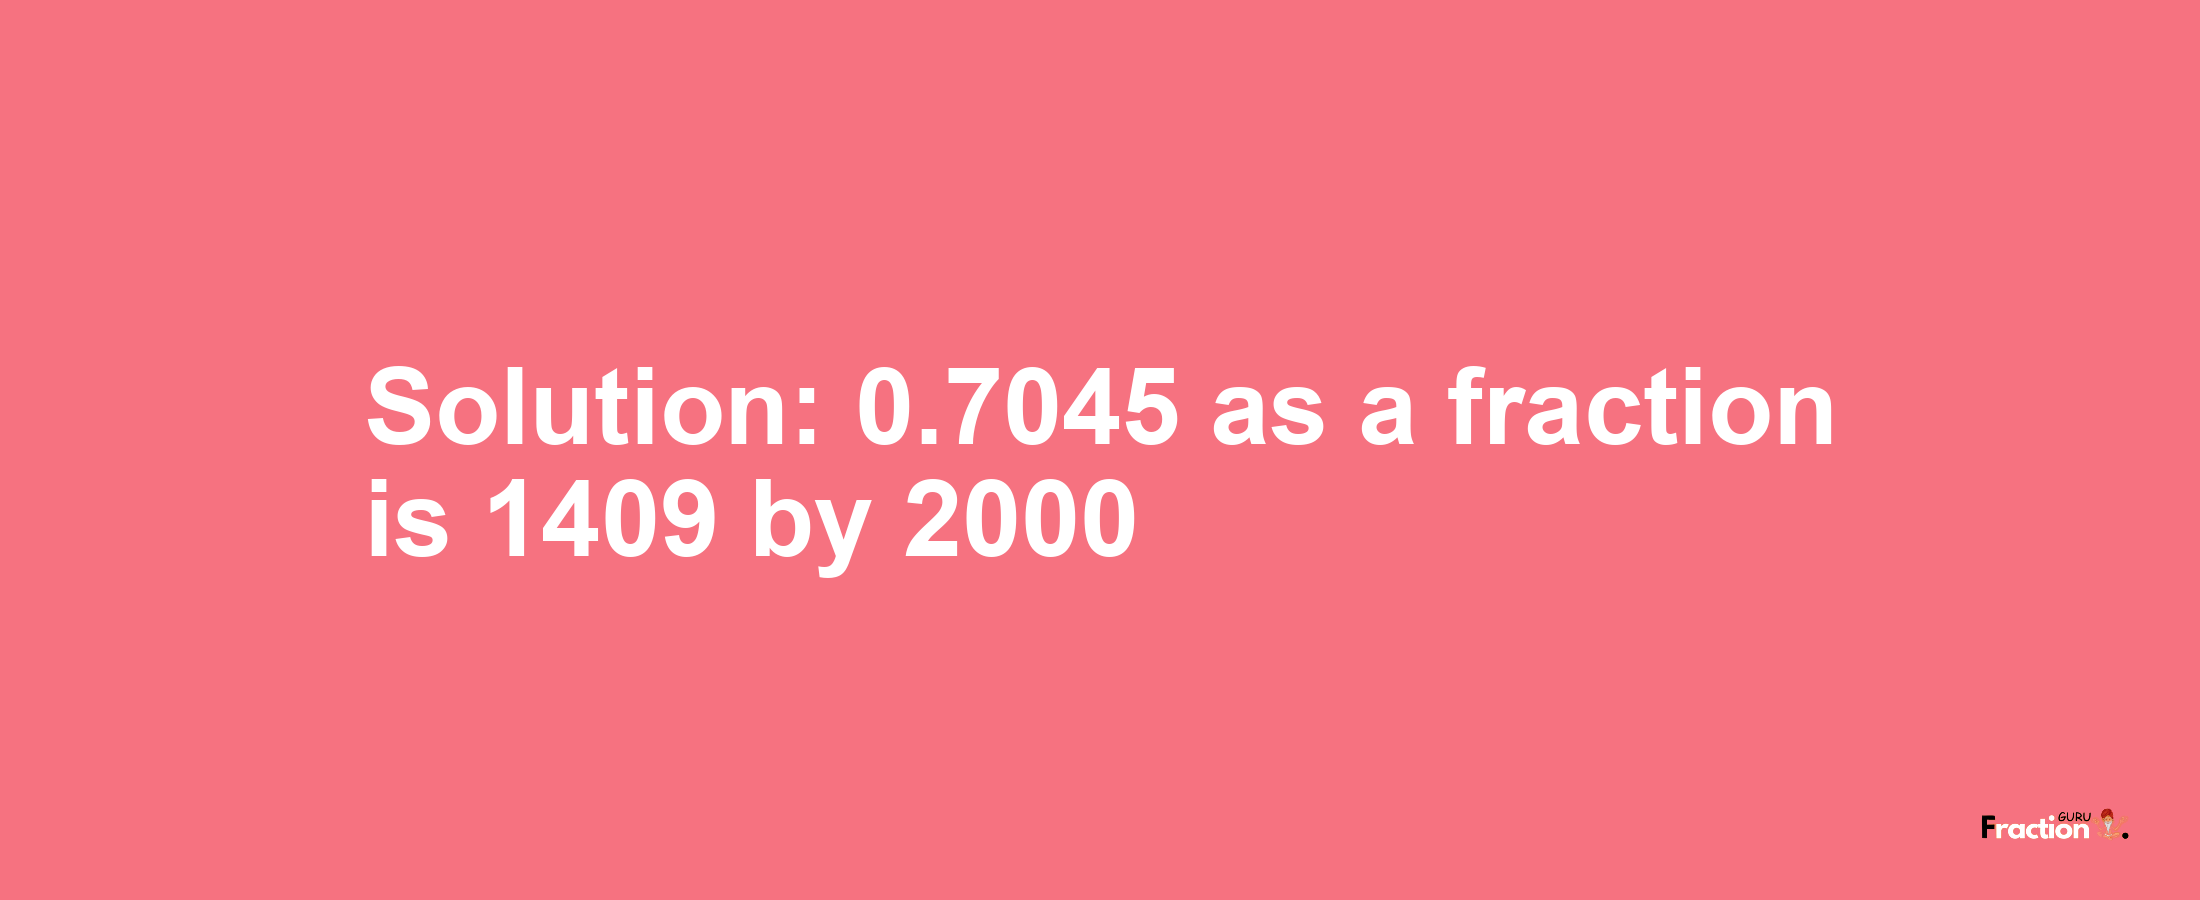 Solution:0.7045 as a fraction is 1409/2000